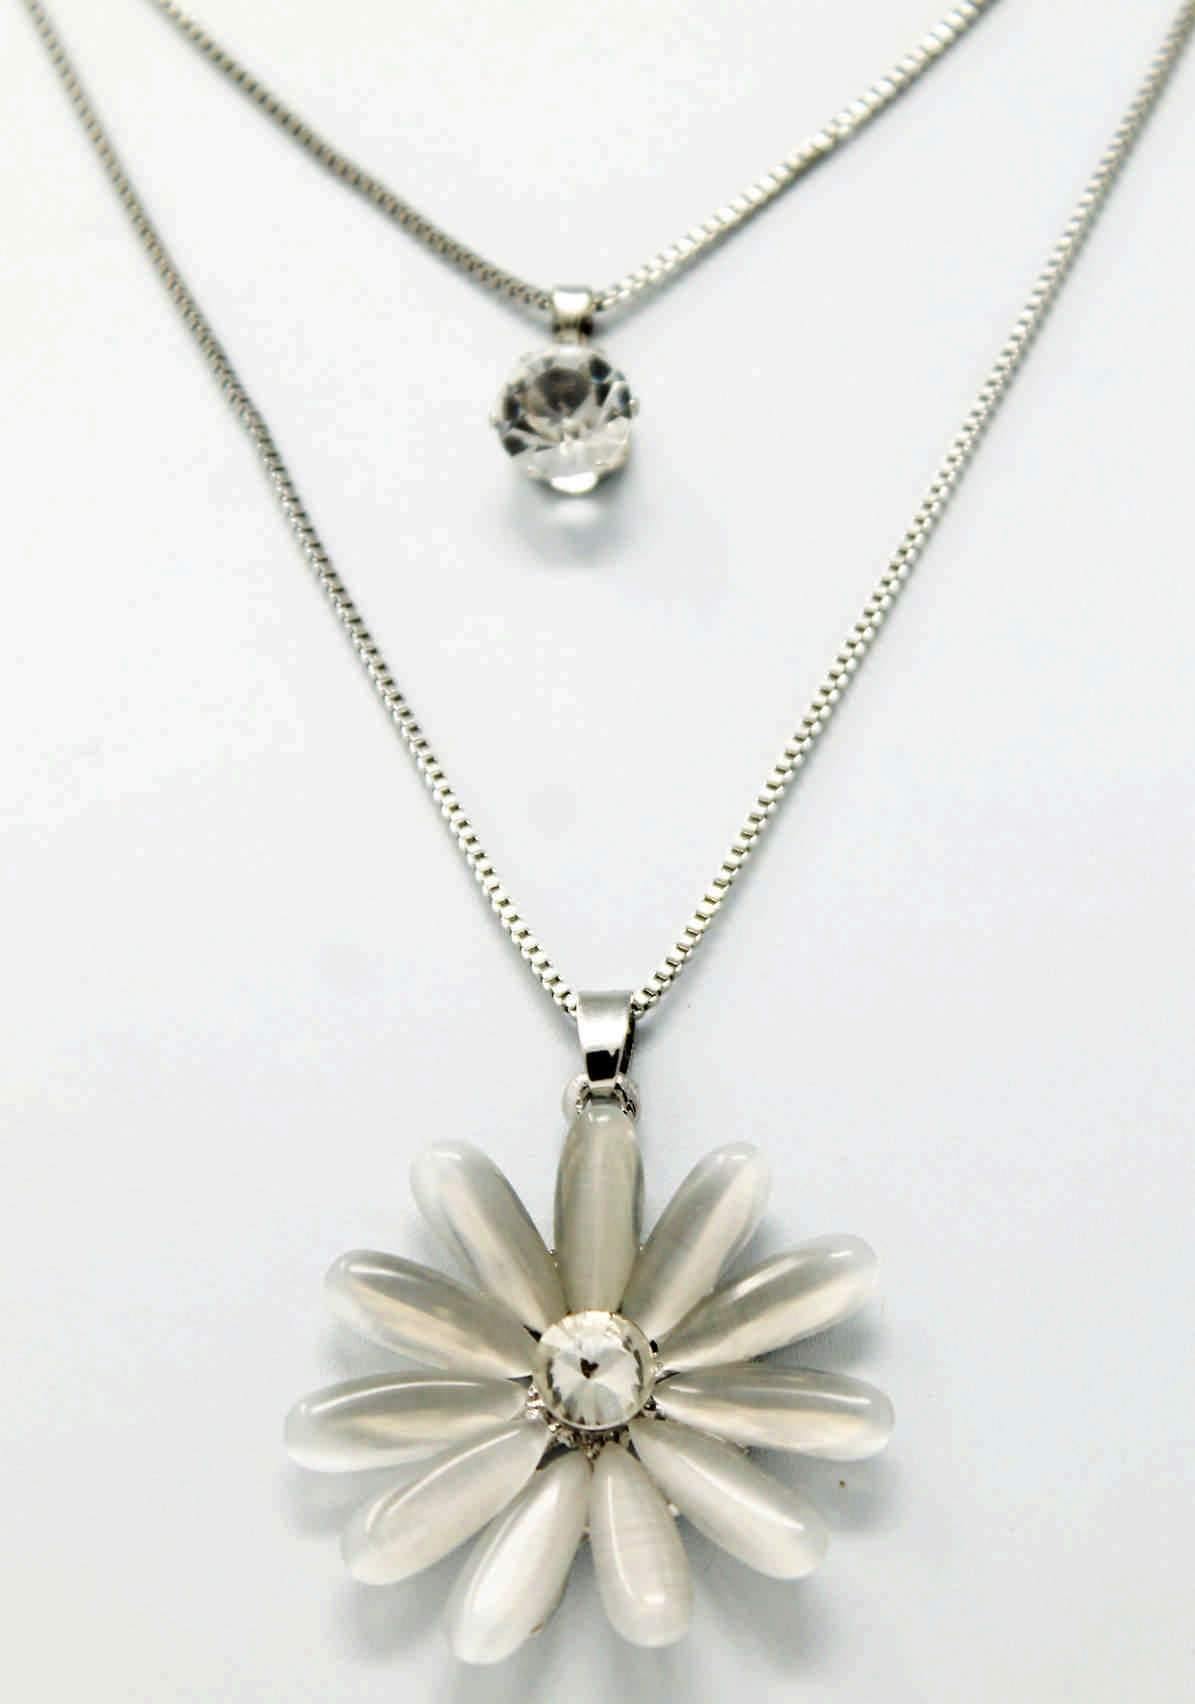 Rhinestones Studded Floral Design Imitation Fashion Metal Double Pendant with Long Chain for Girls